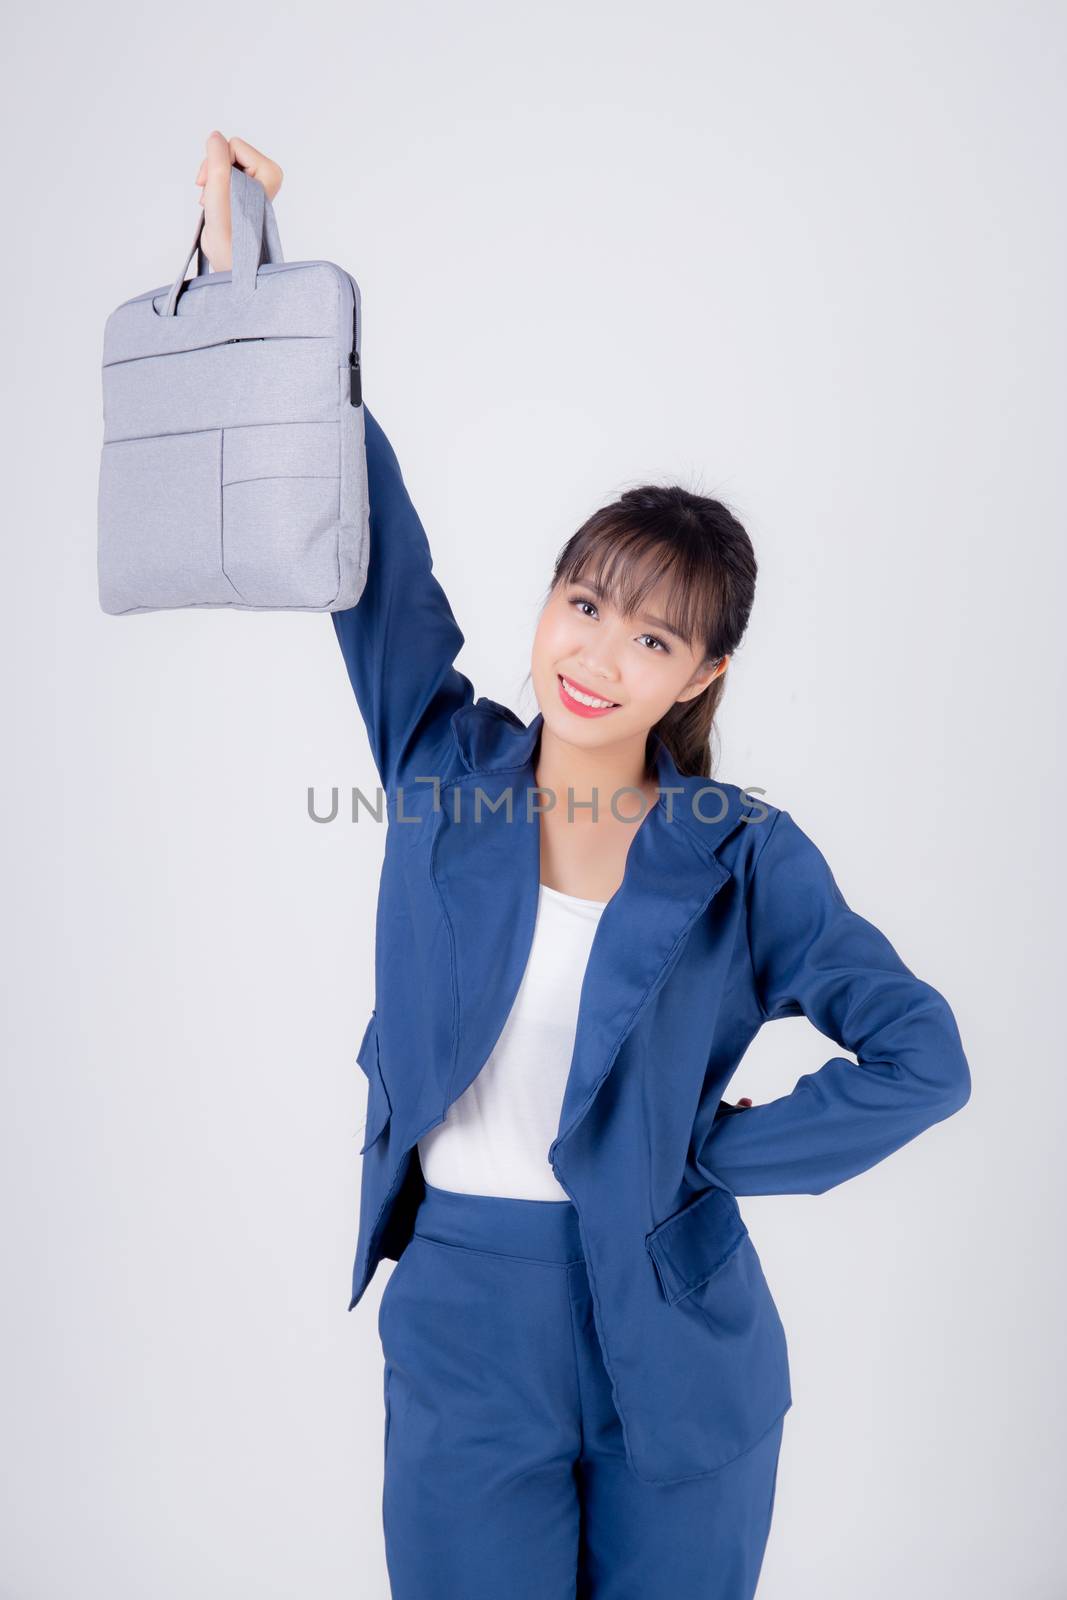 Beautiful portrait young business asian woman holding a briefcase portfolio isolated on white background, confident businesswoman walking and carrying document case of work, employee girl is cheerful.